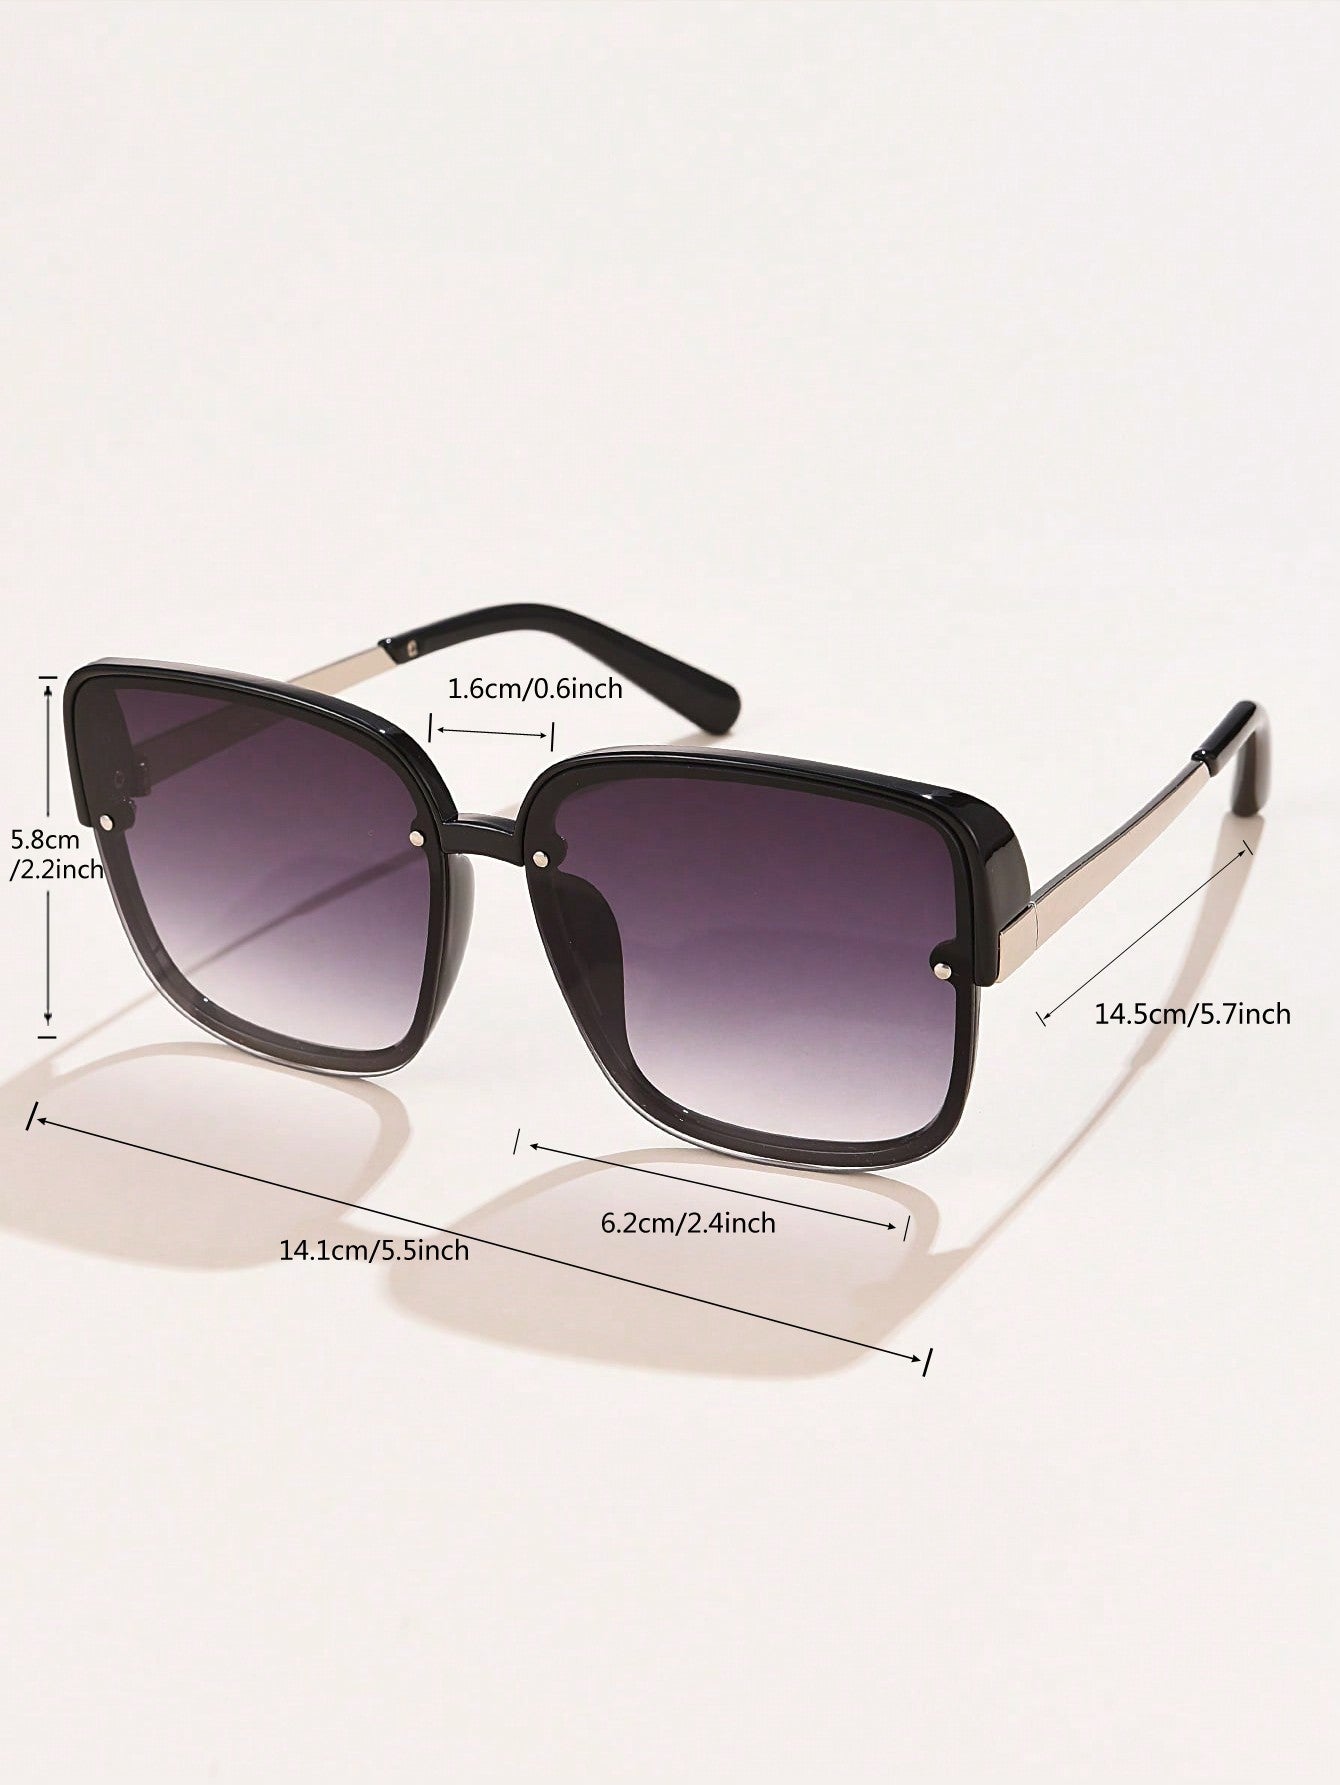 Stylish Tinted Lens Fashion Glasses Goggles-The Perfect Travel Accessory for Women